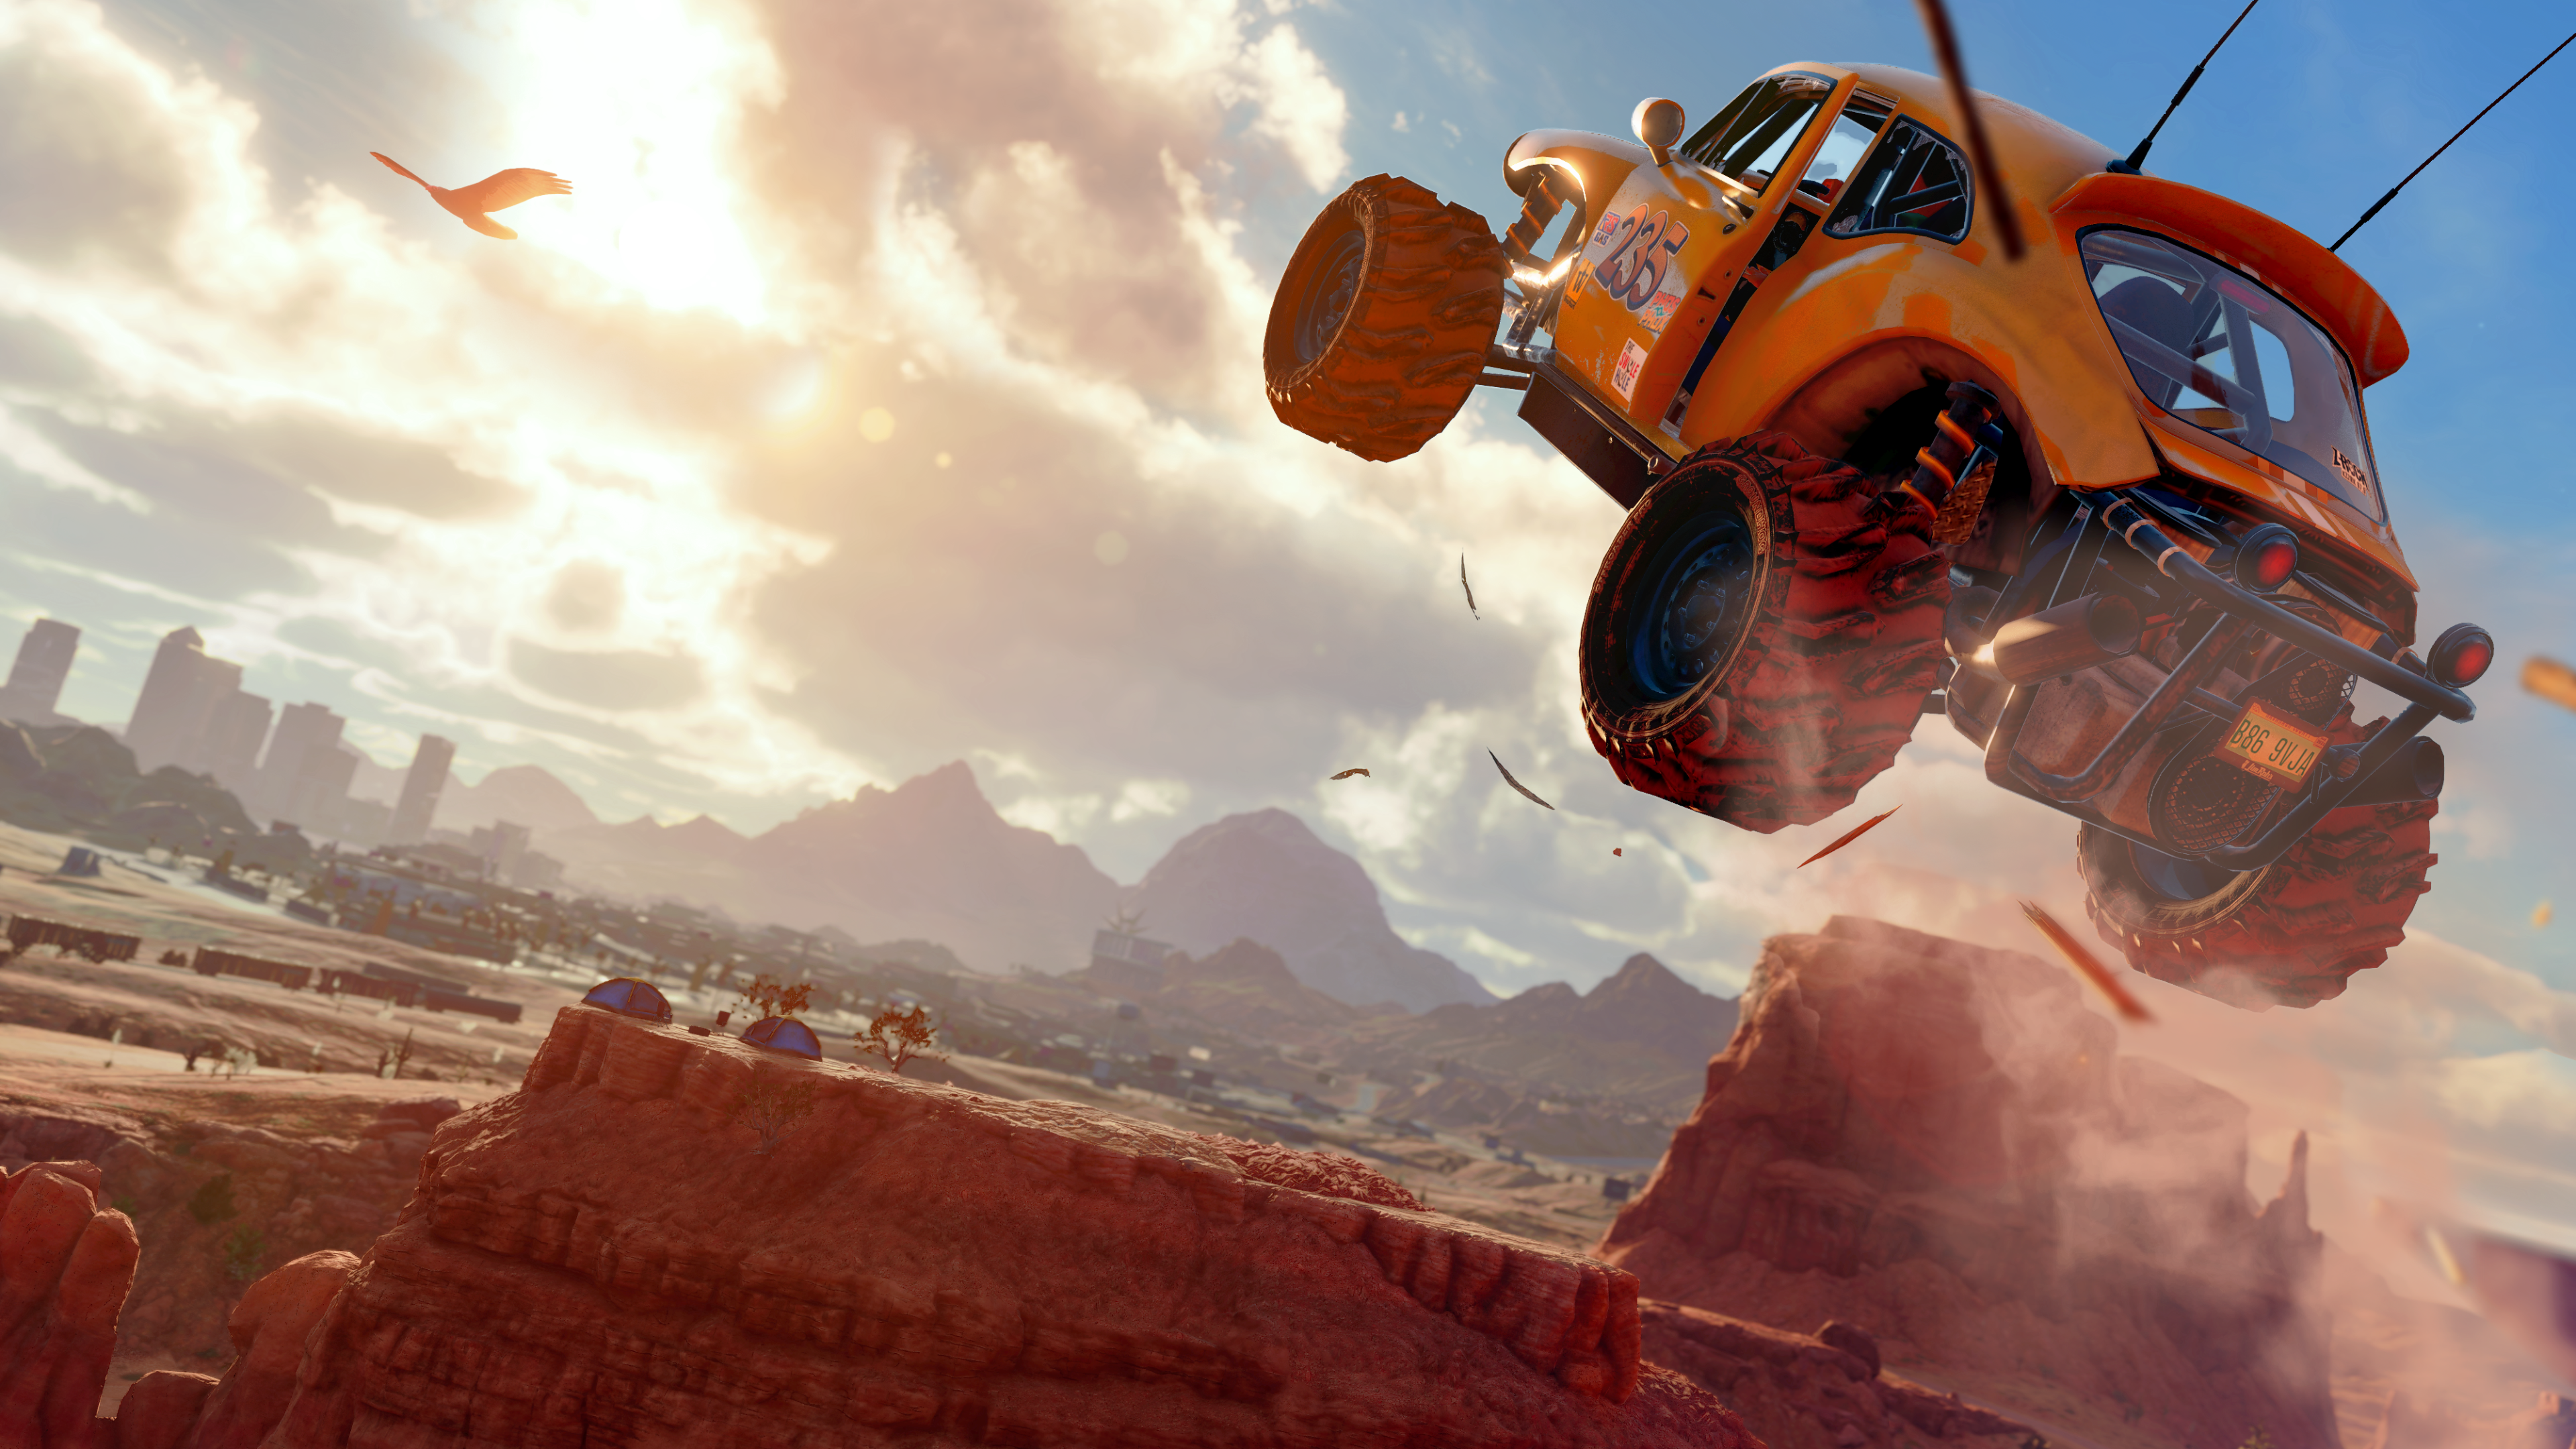 Saints Row reboot screenshot showing an off-road vehicle flying through the air in a desert canyon setting